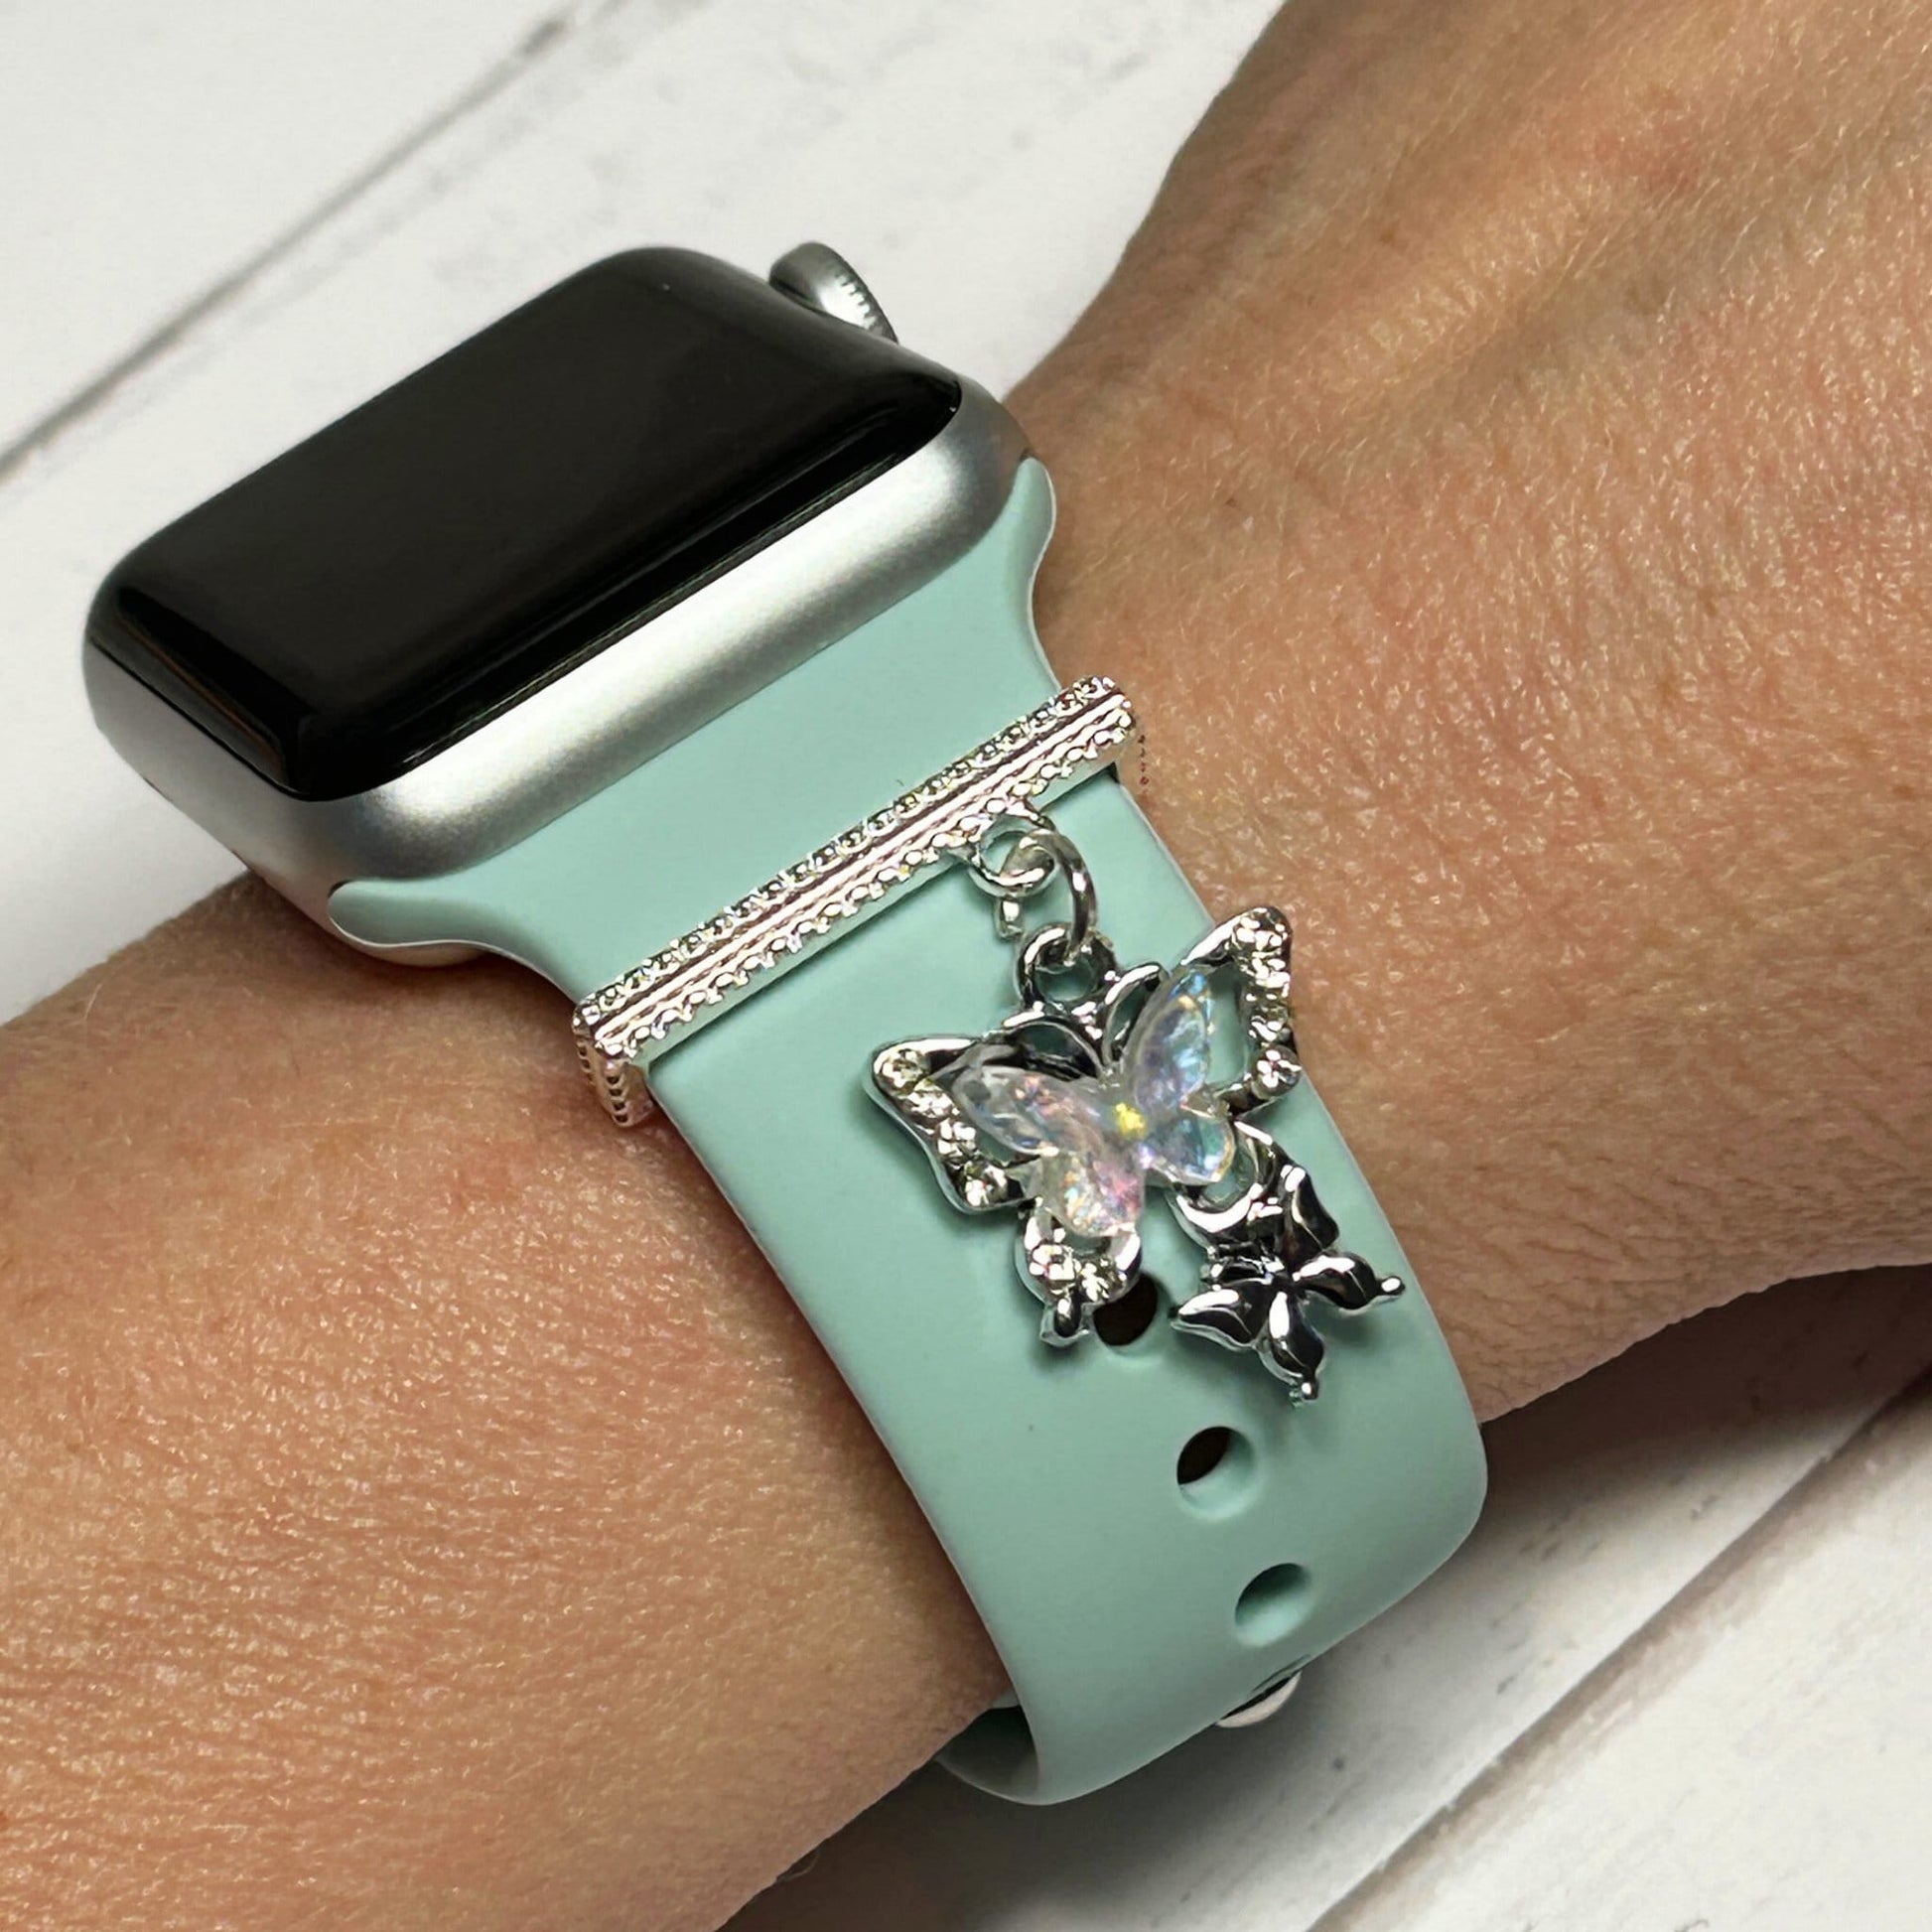 Spring Butterfly Watchband Charms, Watchband Jewelry, Spring Watchbands